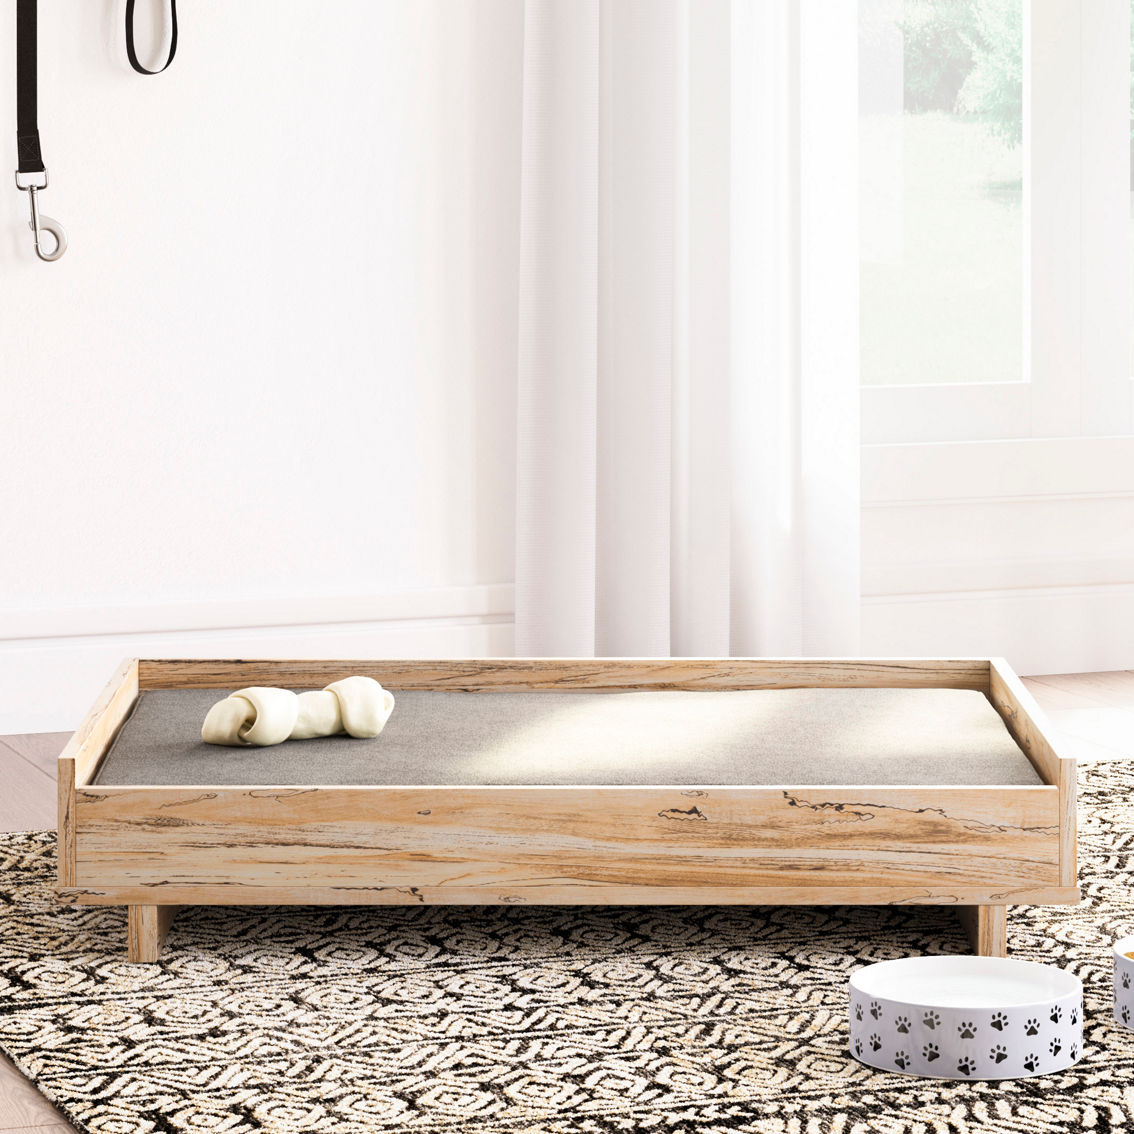 Signature Design by Ashley Piperton Pet Bed Frame - Image 2 of 2